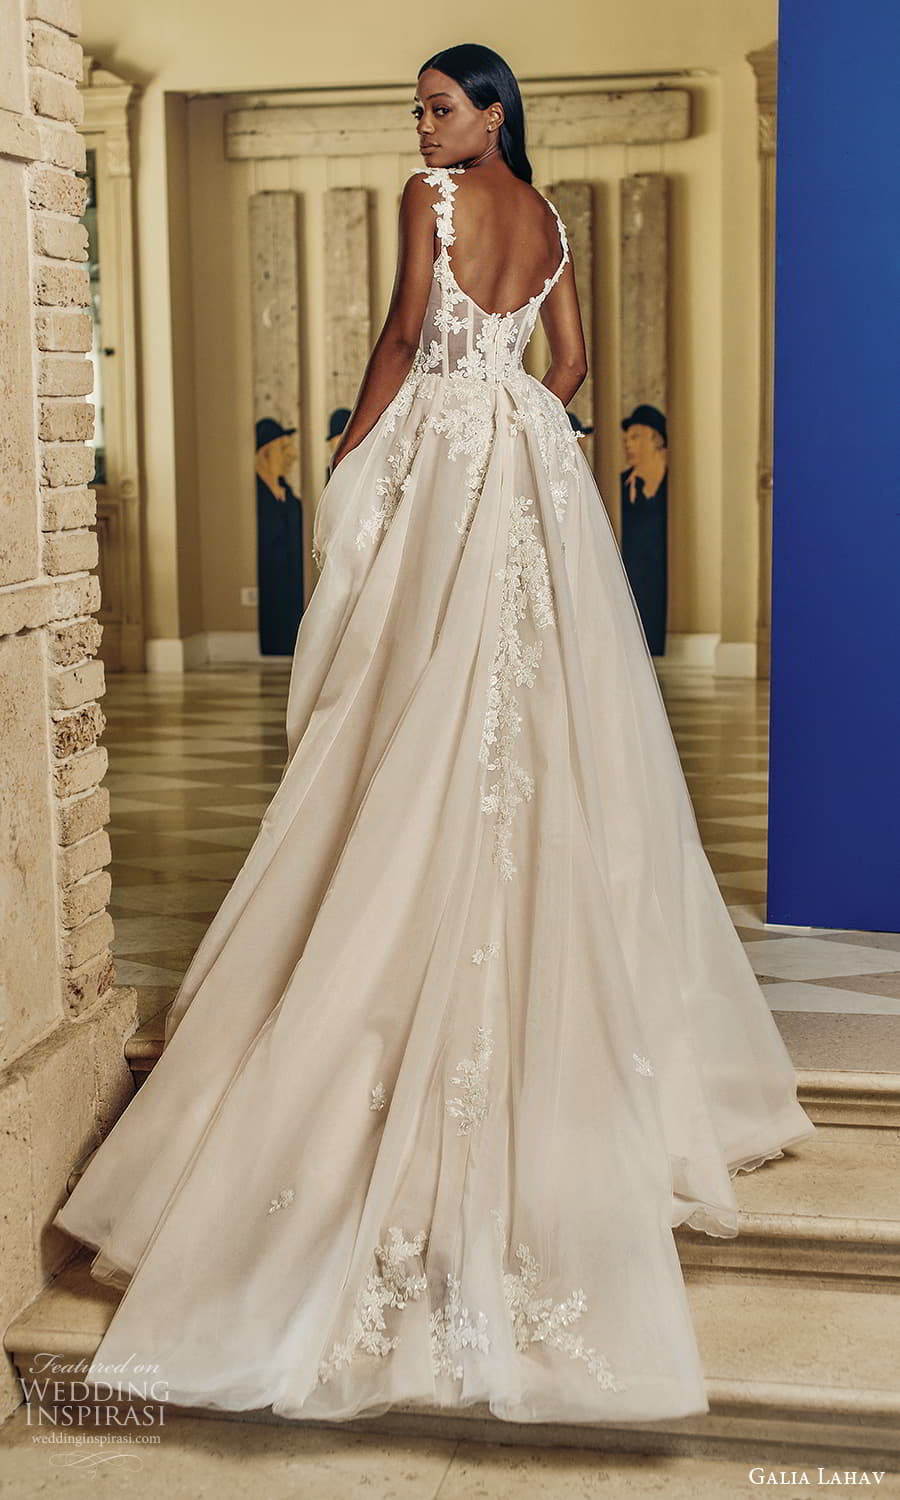 galia lahav fall 2022 couture bridal sleeveless straps sweetheart neckline embellished bodice a line ball gown wedding dress chapel train scoop back (6) bv